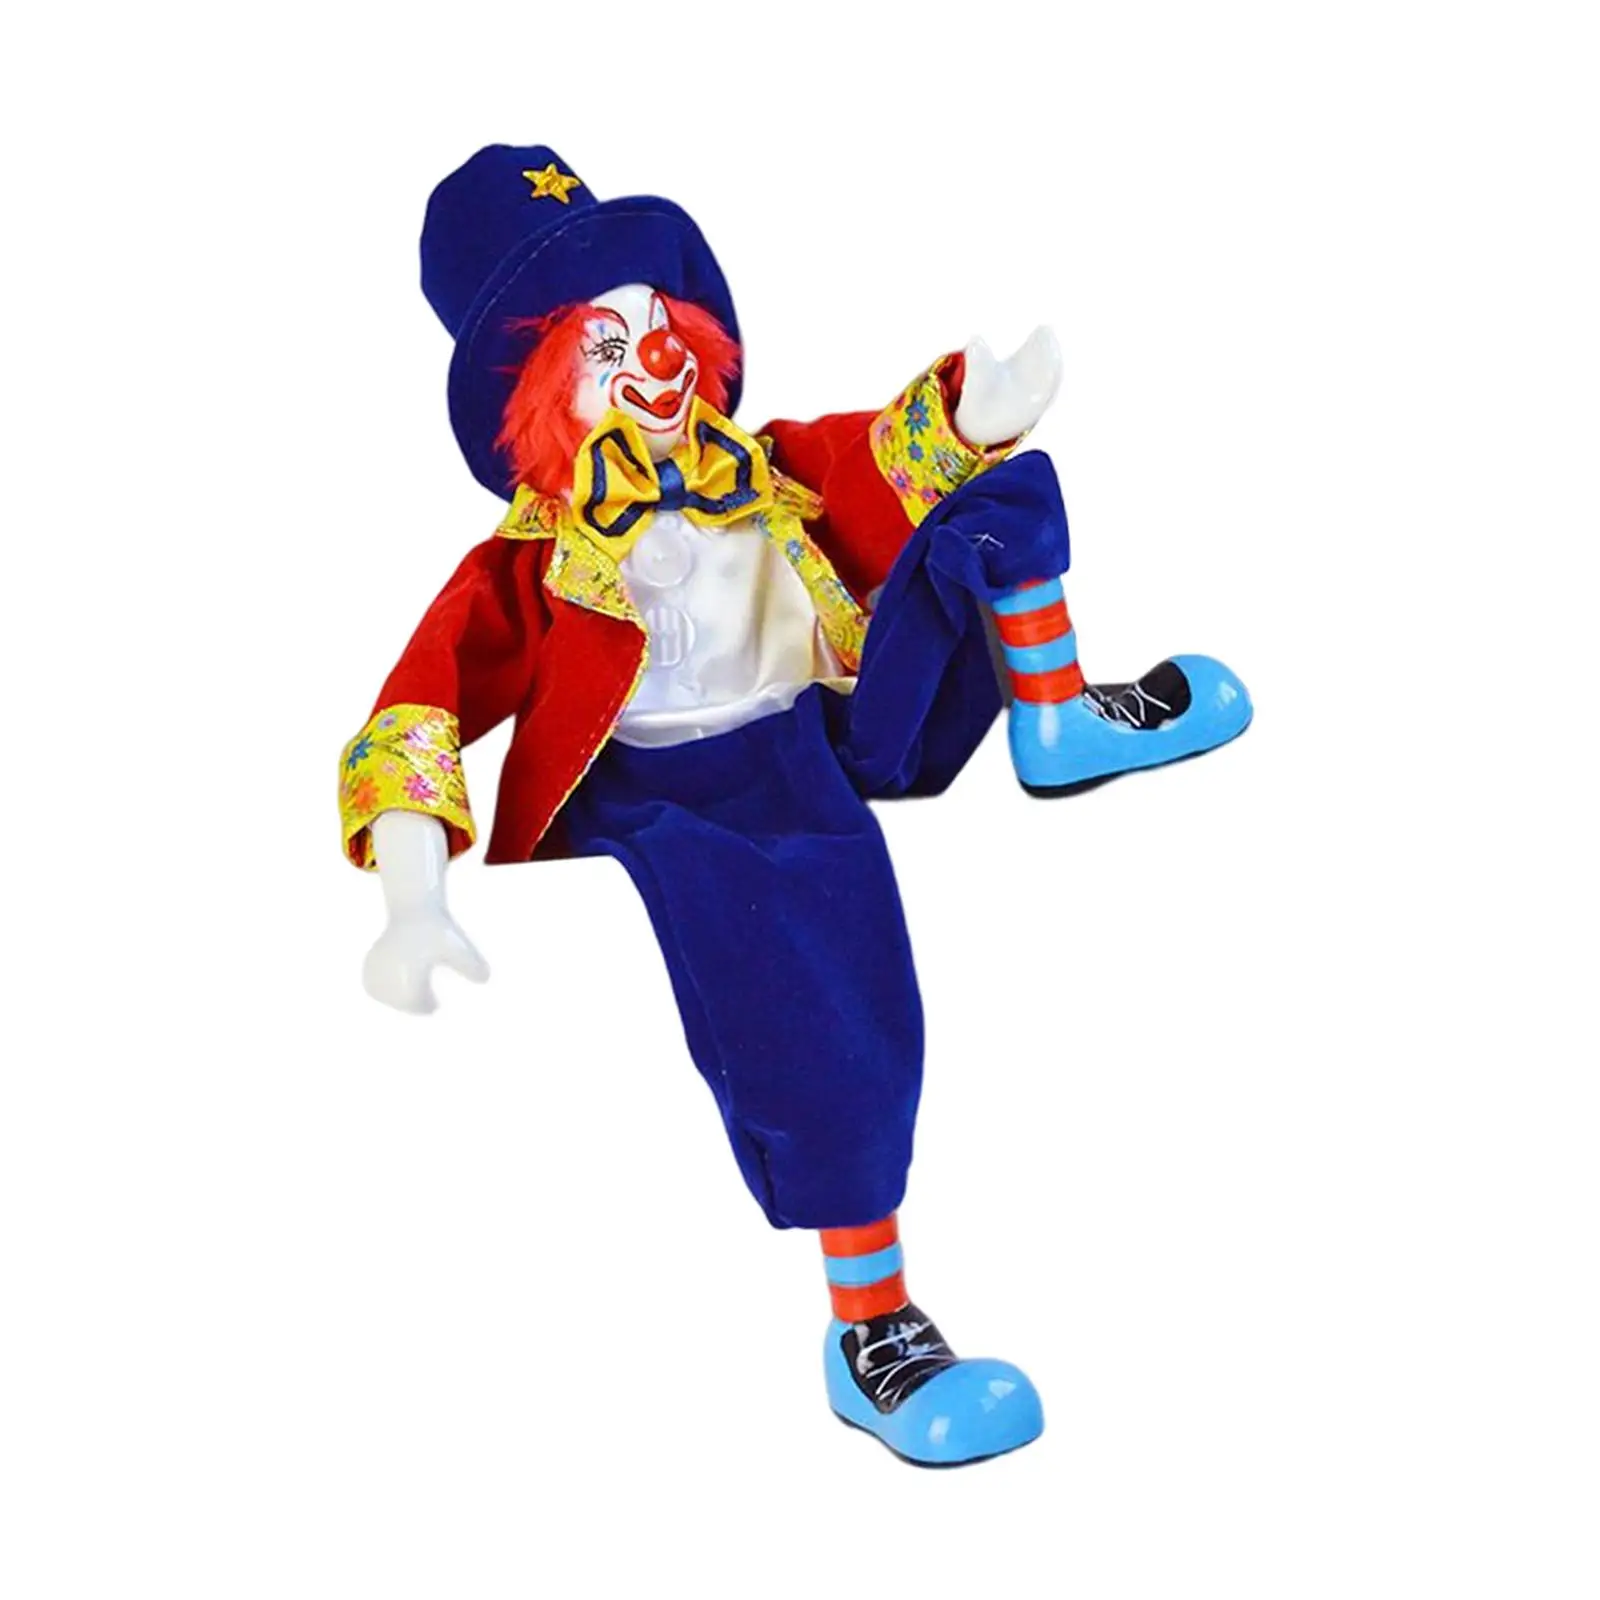 43cm Clown Stuffed Doll Funny Action Figure for Bedroom Tabletop Festival